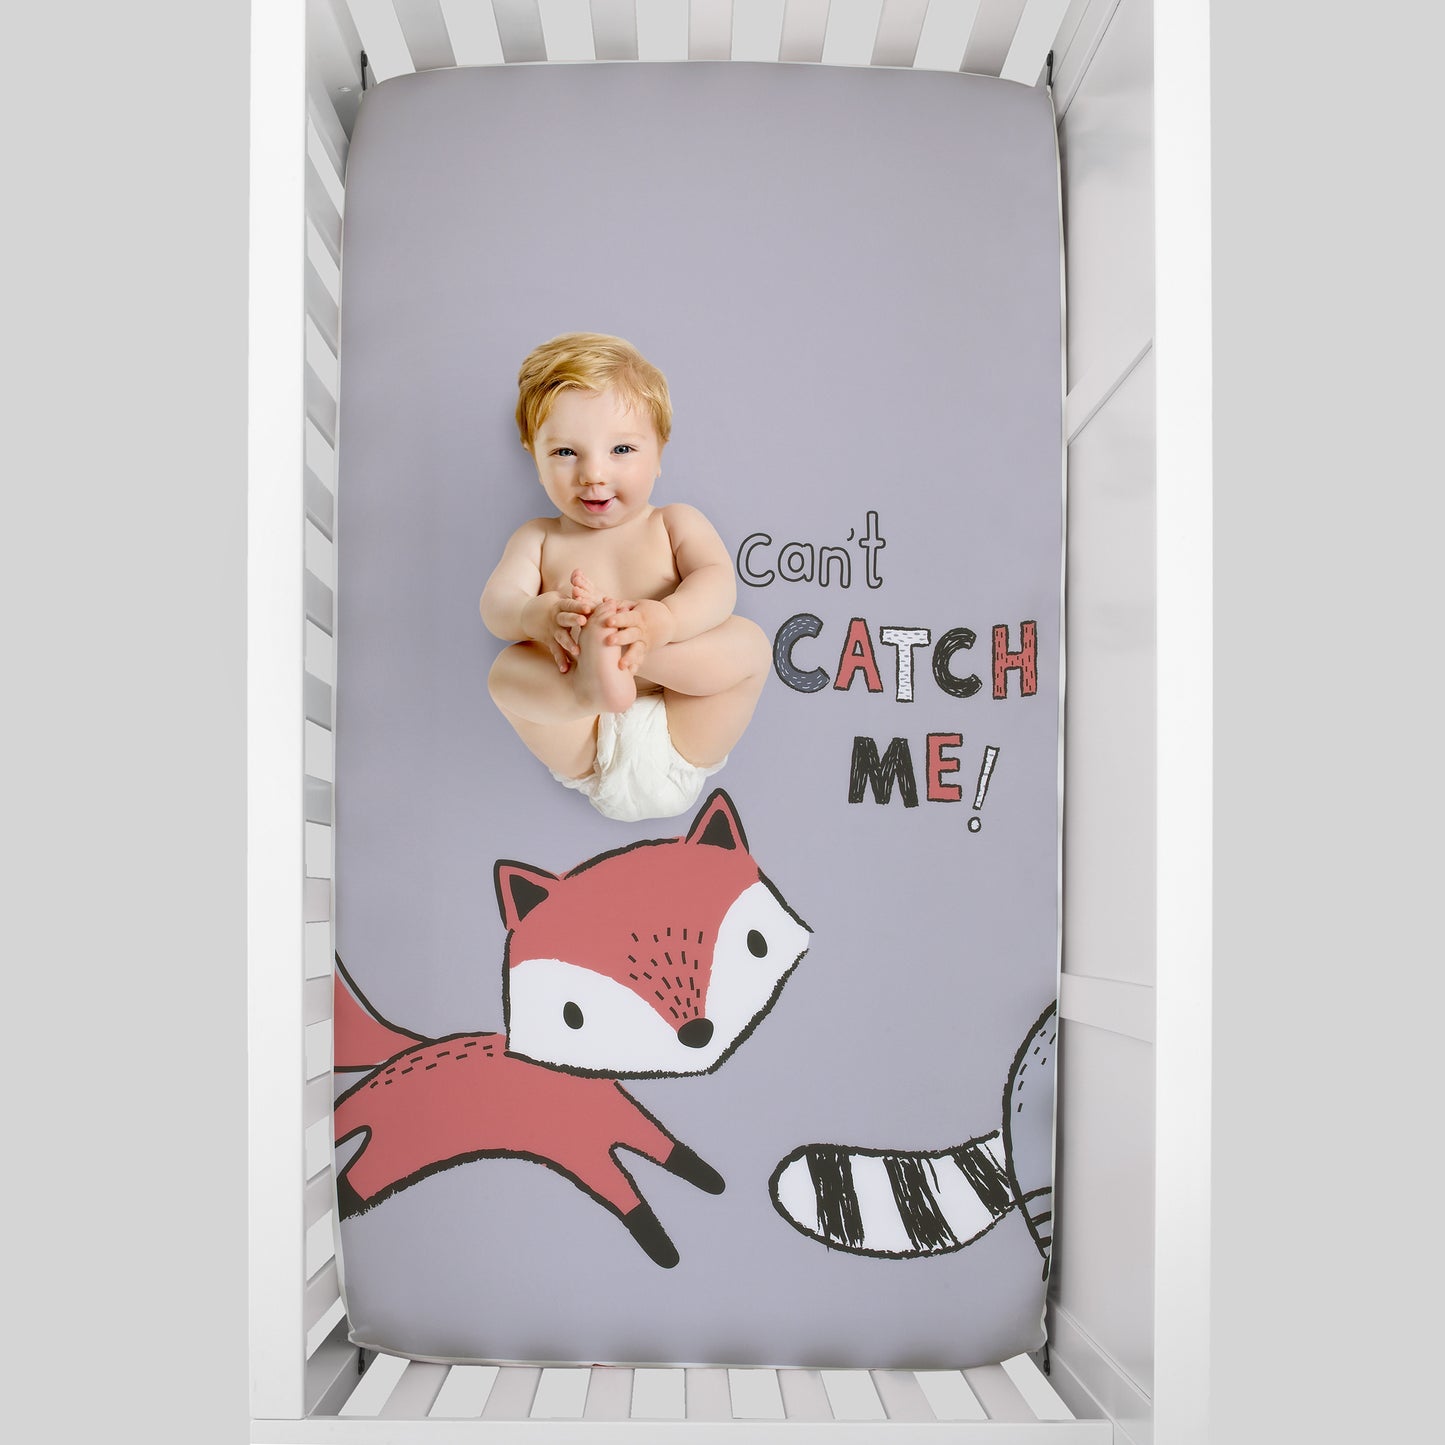 Little Love by NoJo Lil Fox - Grey, Orange, White "Cant Catch Me!" Photo Op Fitted Crib Sheet